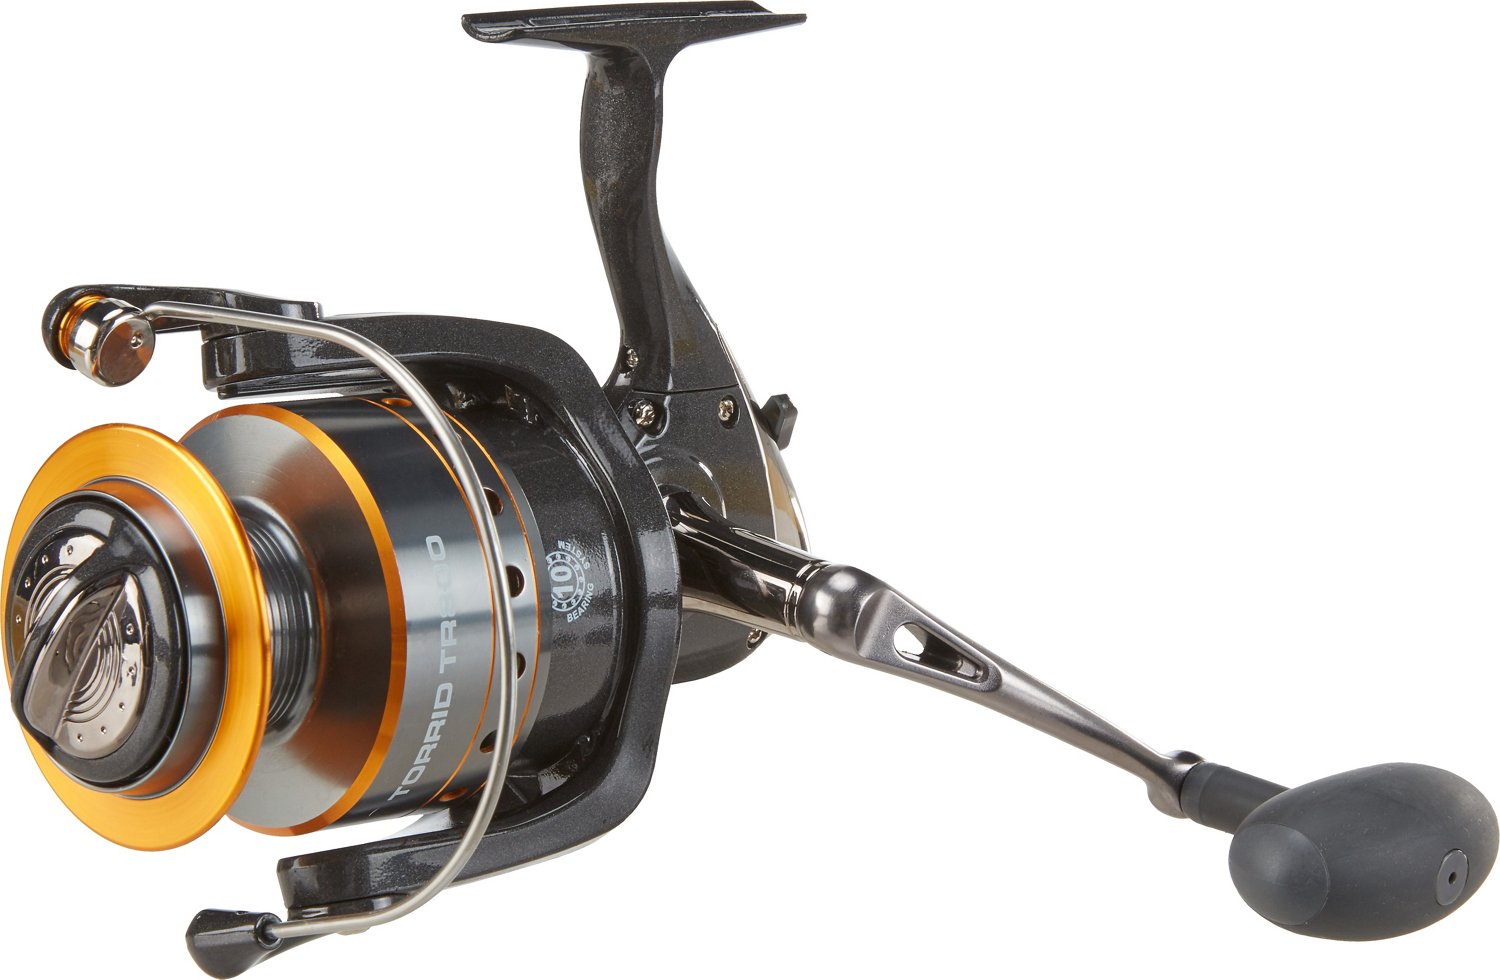 Zetron Spinning Reel - 9+1 BB Smooth Powerful Fishing Reel, Light Weight,  Perfect for Bass Fishing Catfish Fishing, Over-Size Comfortable Drag Knob